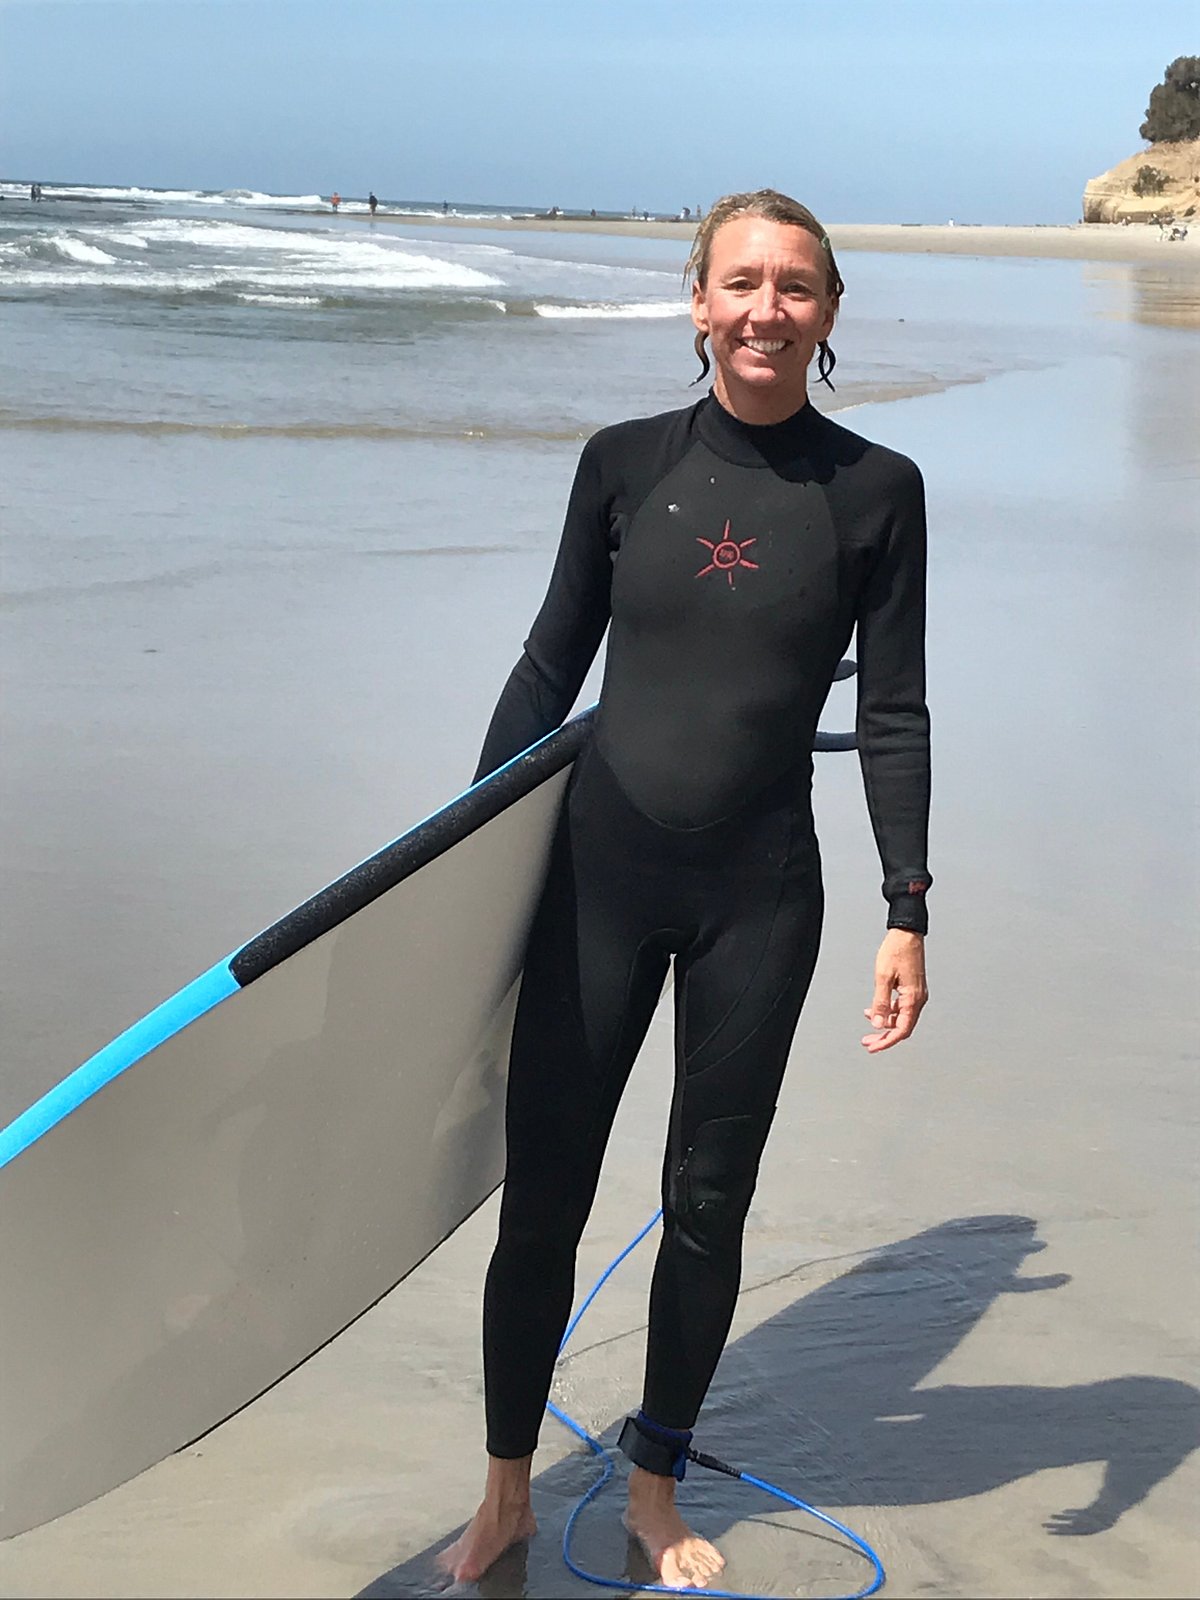 Wavehuggers Encinitas All You Need To Know Before You Go 5383